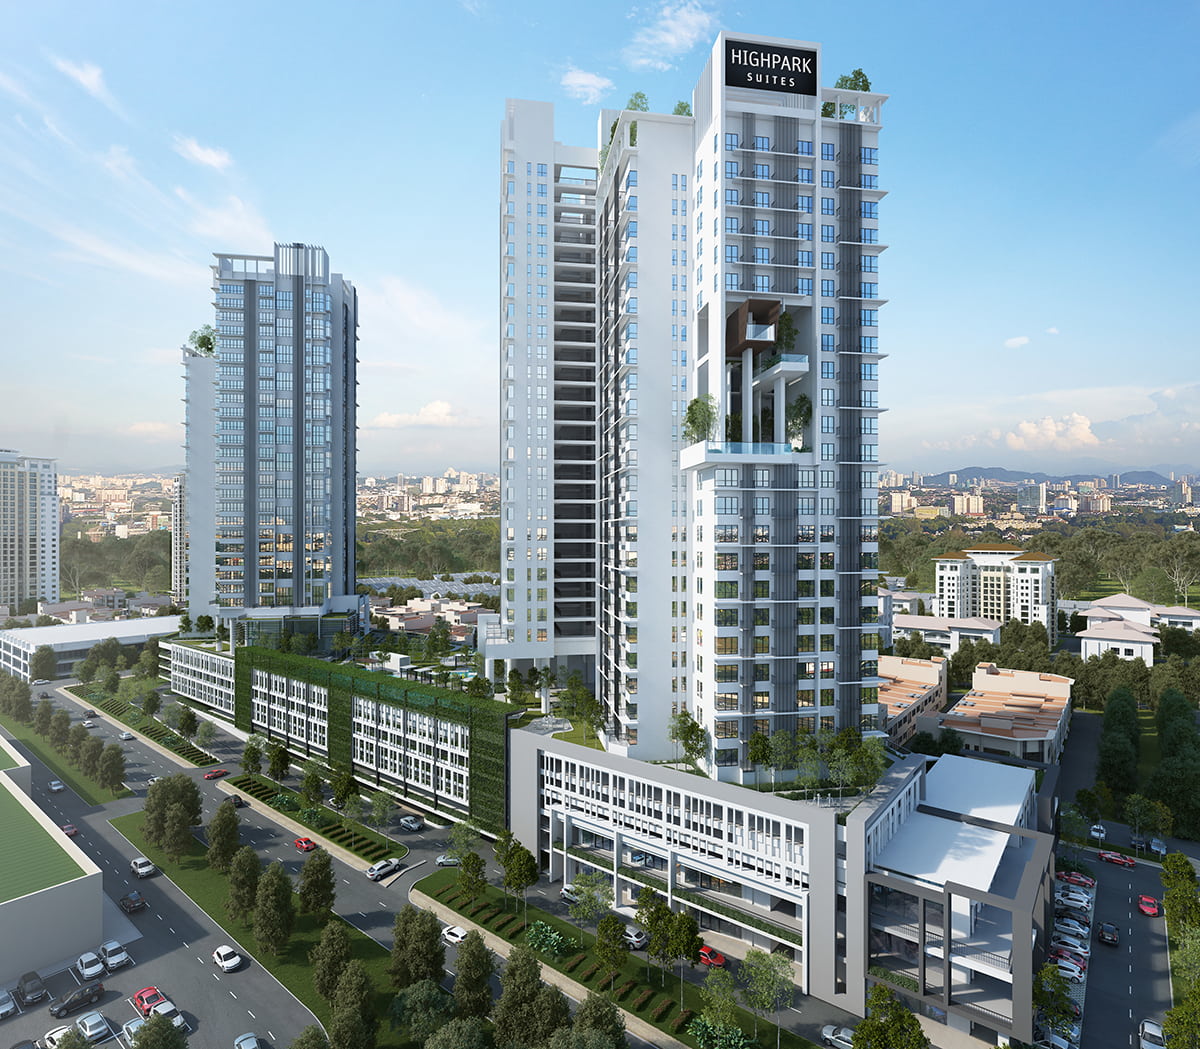 Gamuda Land’s HighPark Suites in Petaling Jaya is one of the residential properties in the Klang Valley where Maybank Islamic’s HouzKEY scheme is applicable.